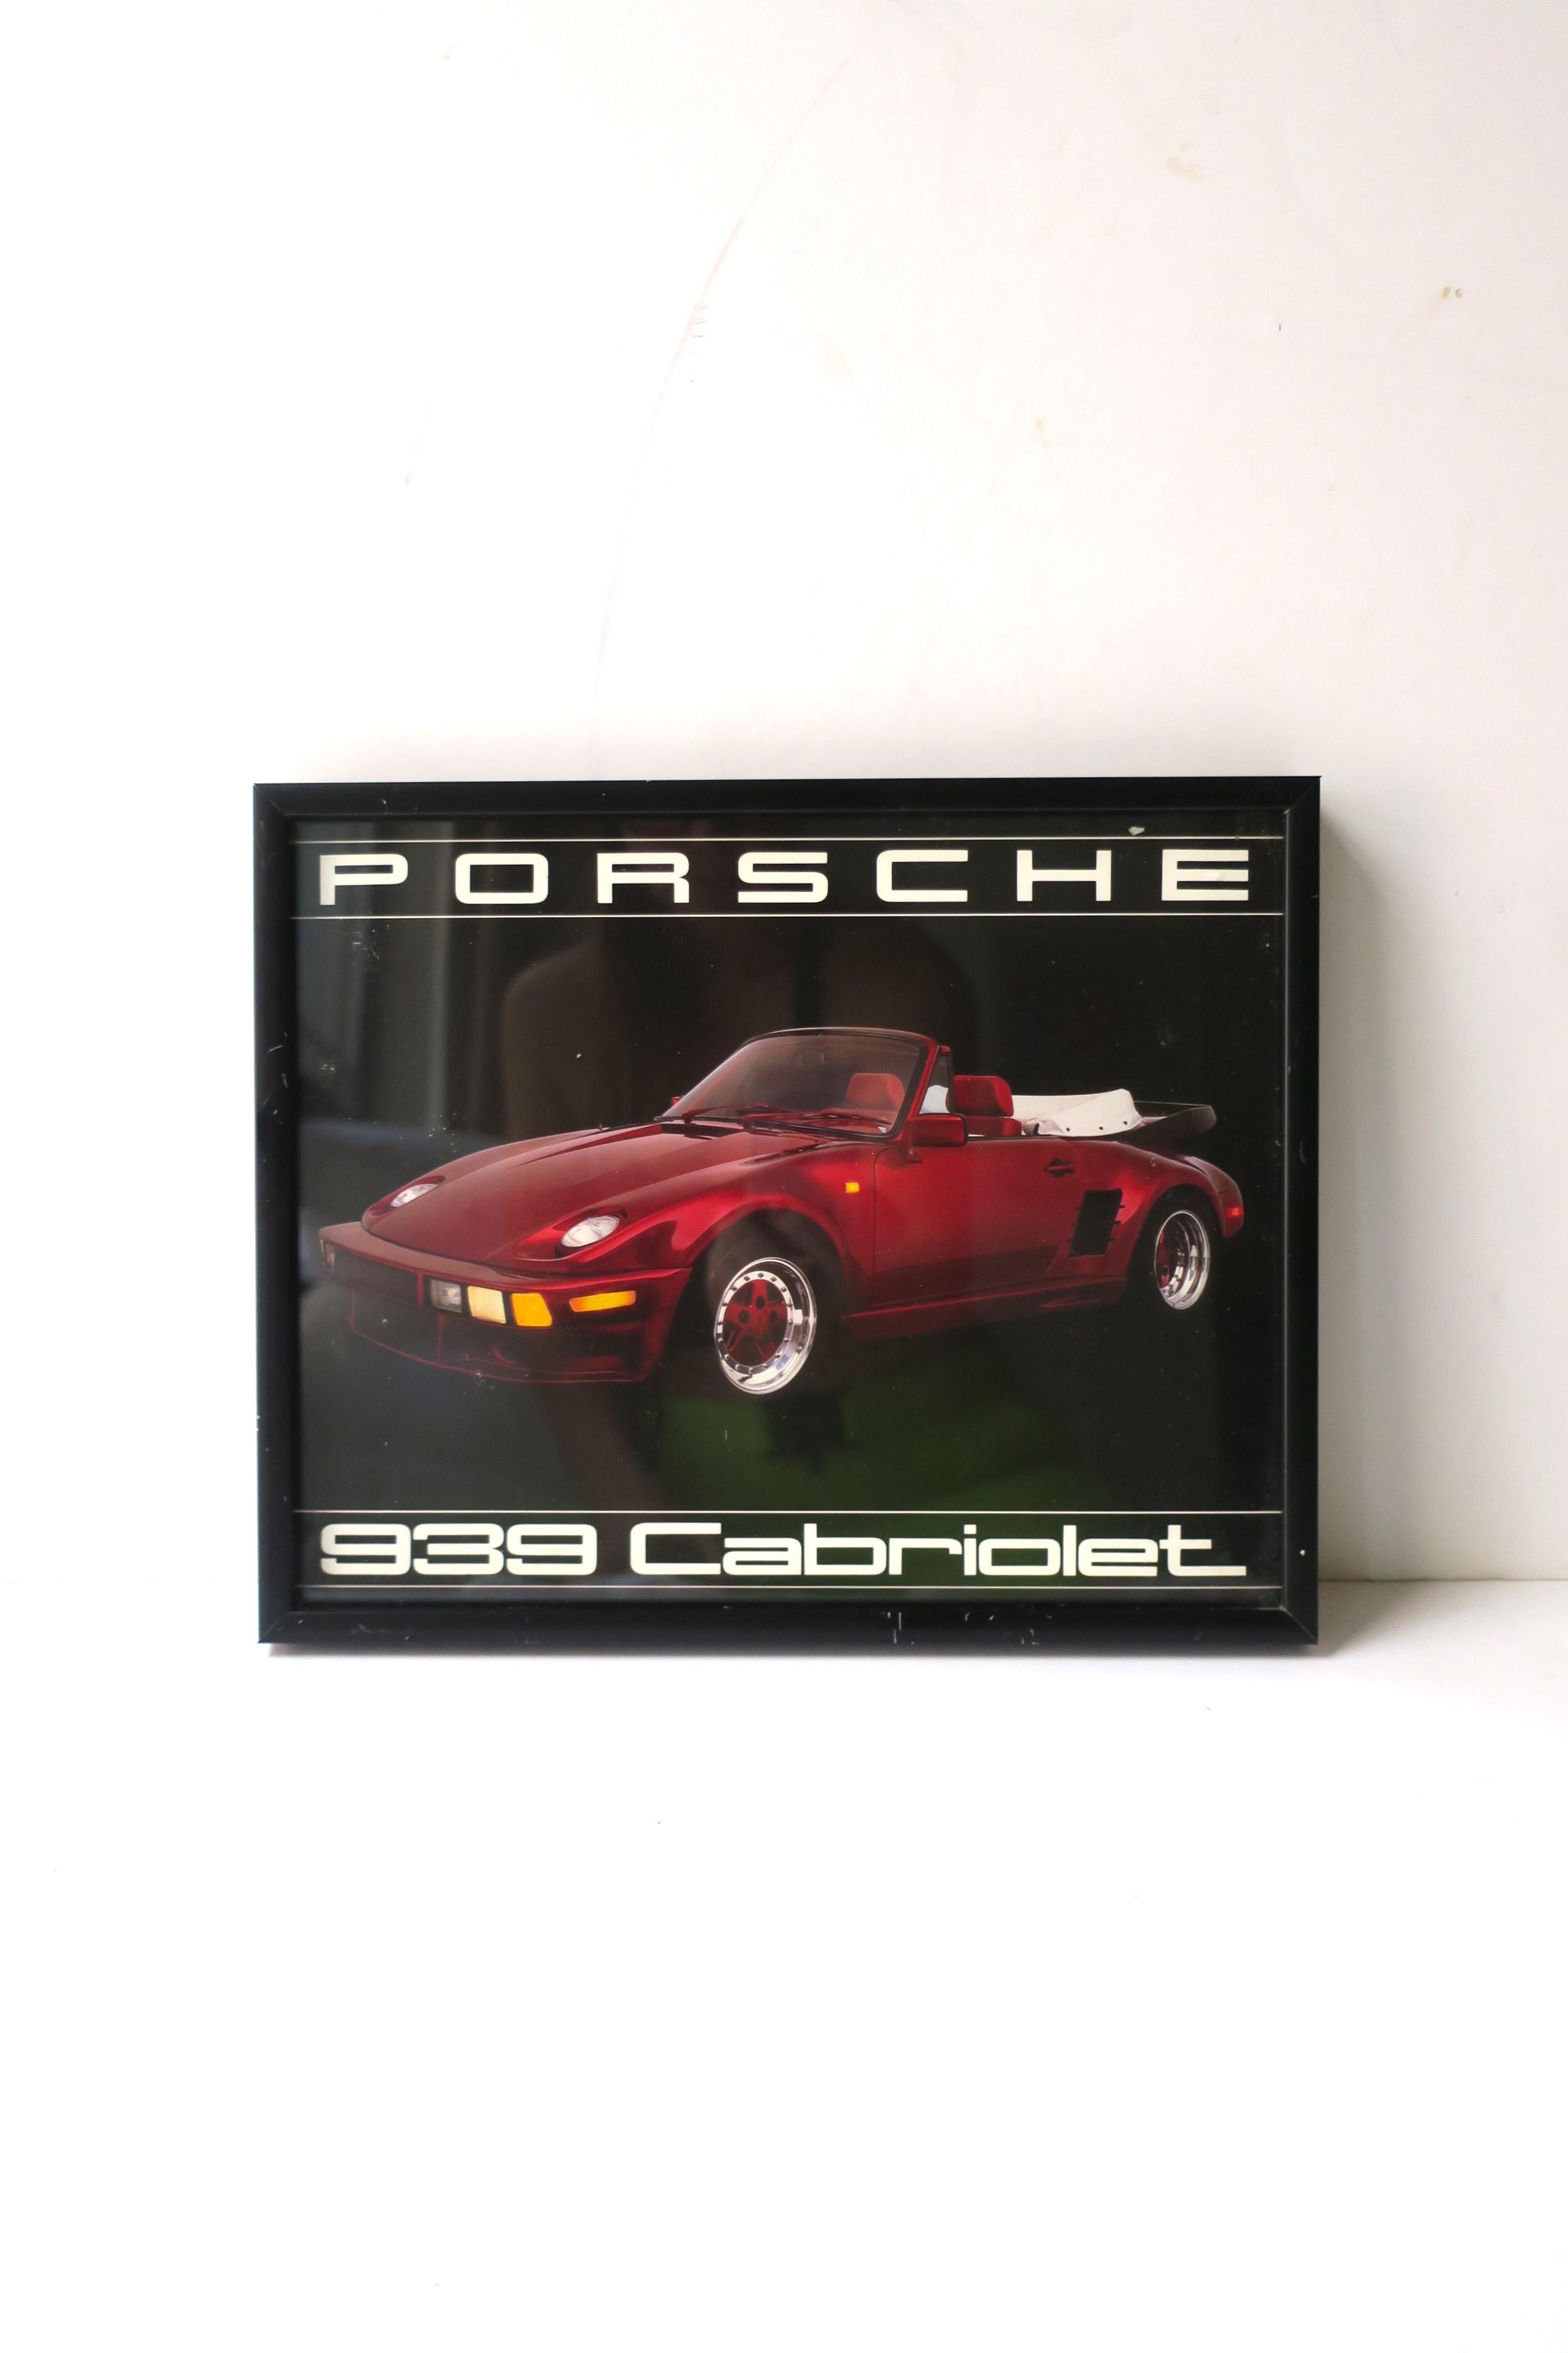 A vintage framed poster of a Porsche 939 Cabriolet, 1987. This poster wall art piece has protective glass front and a black metal frame. Dated on back July 7, 1987 as shown in last three images. Dimensions: 9.94